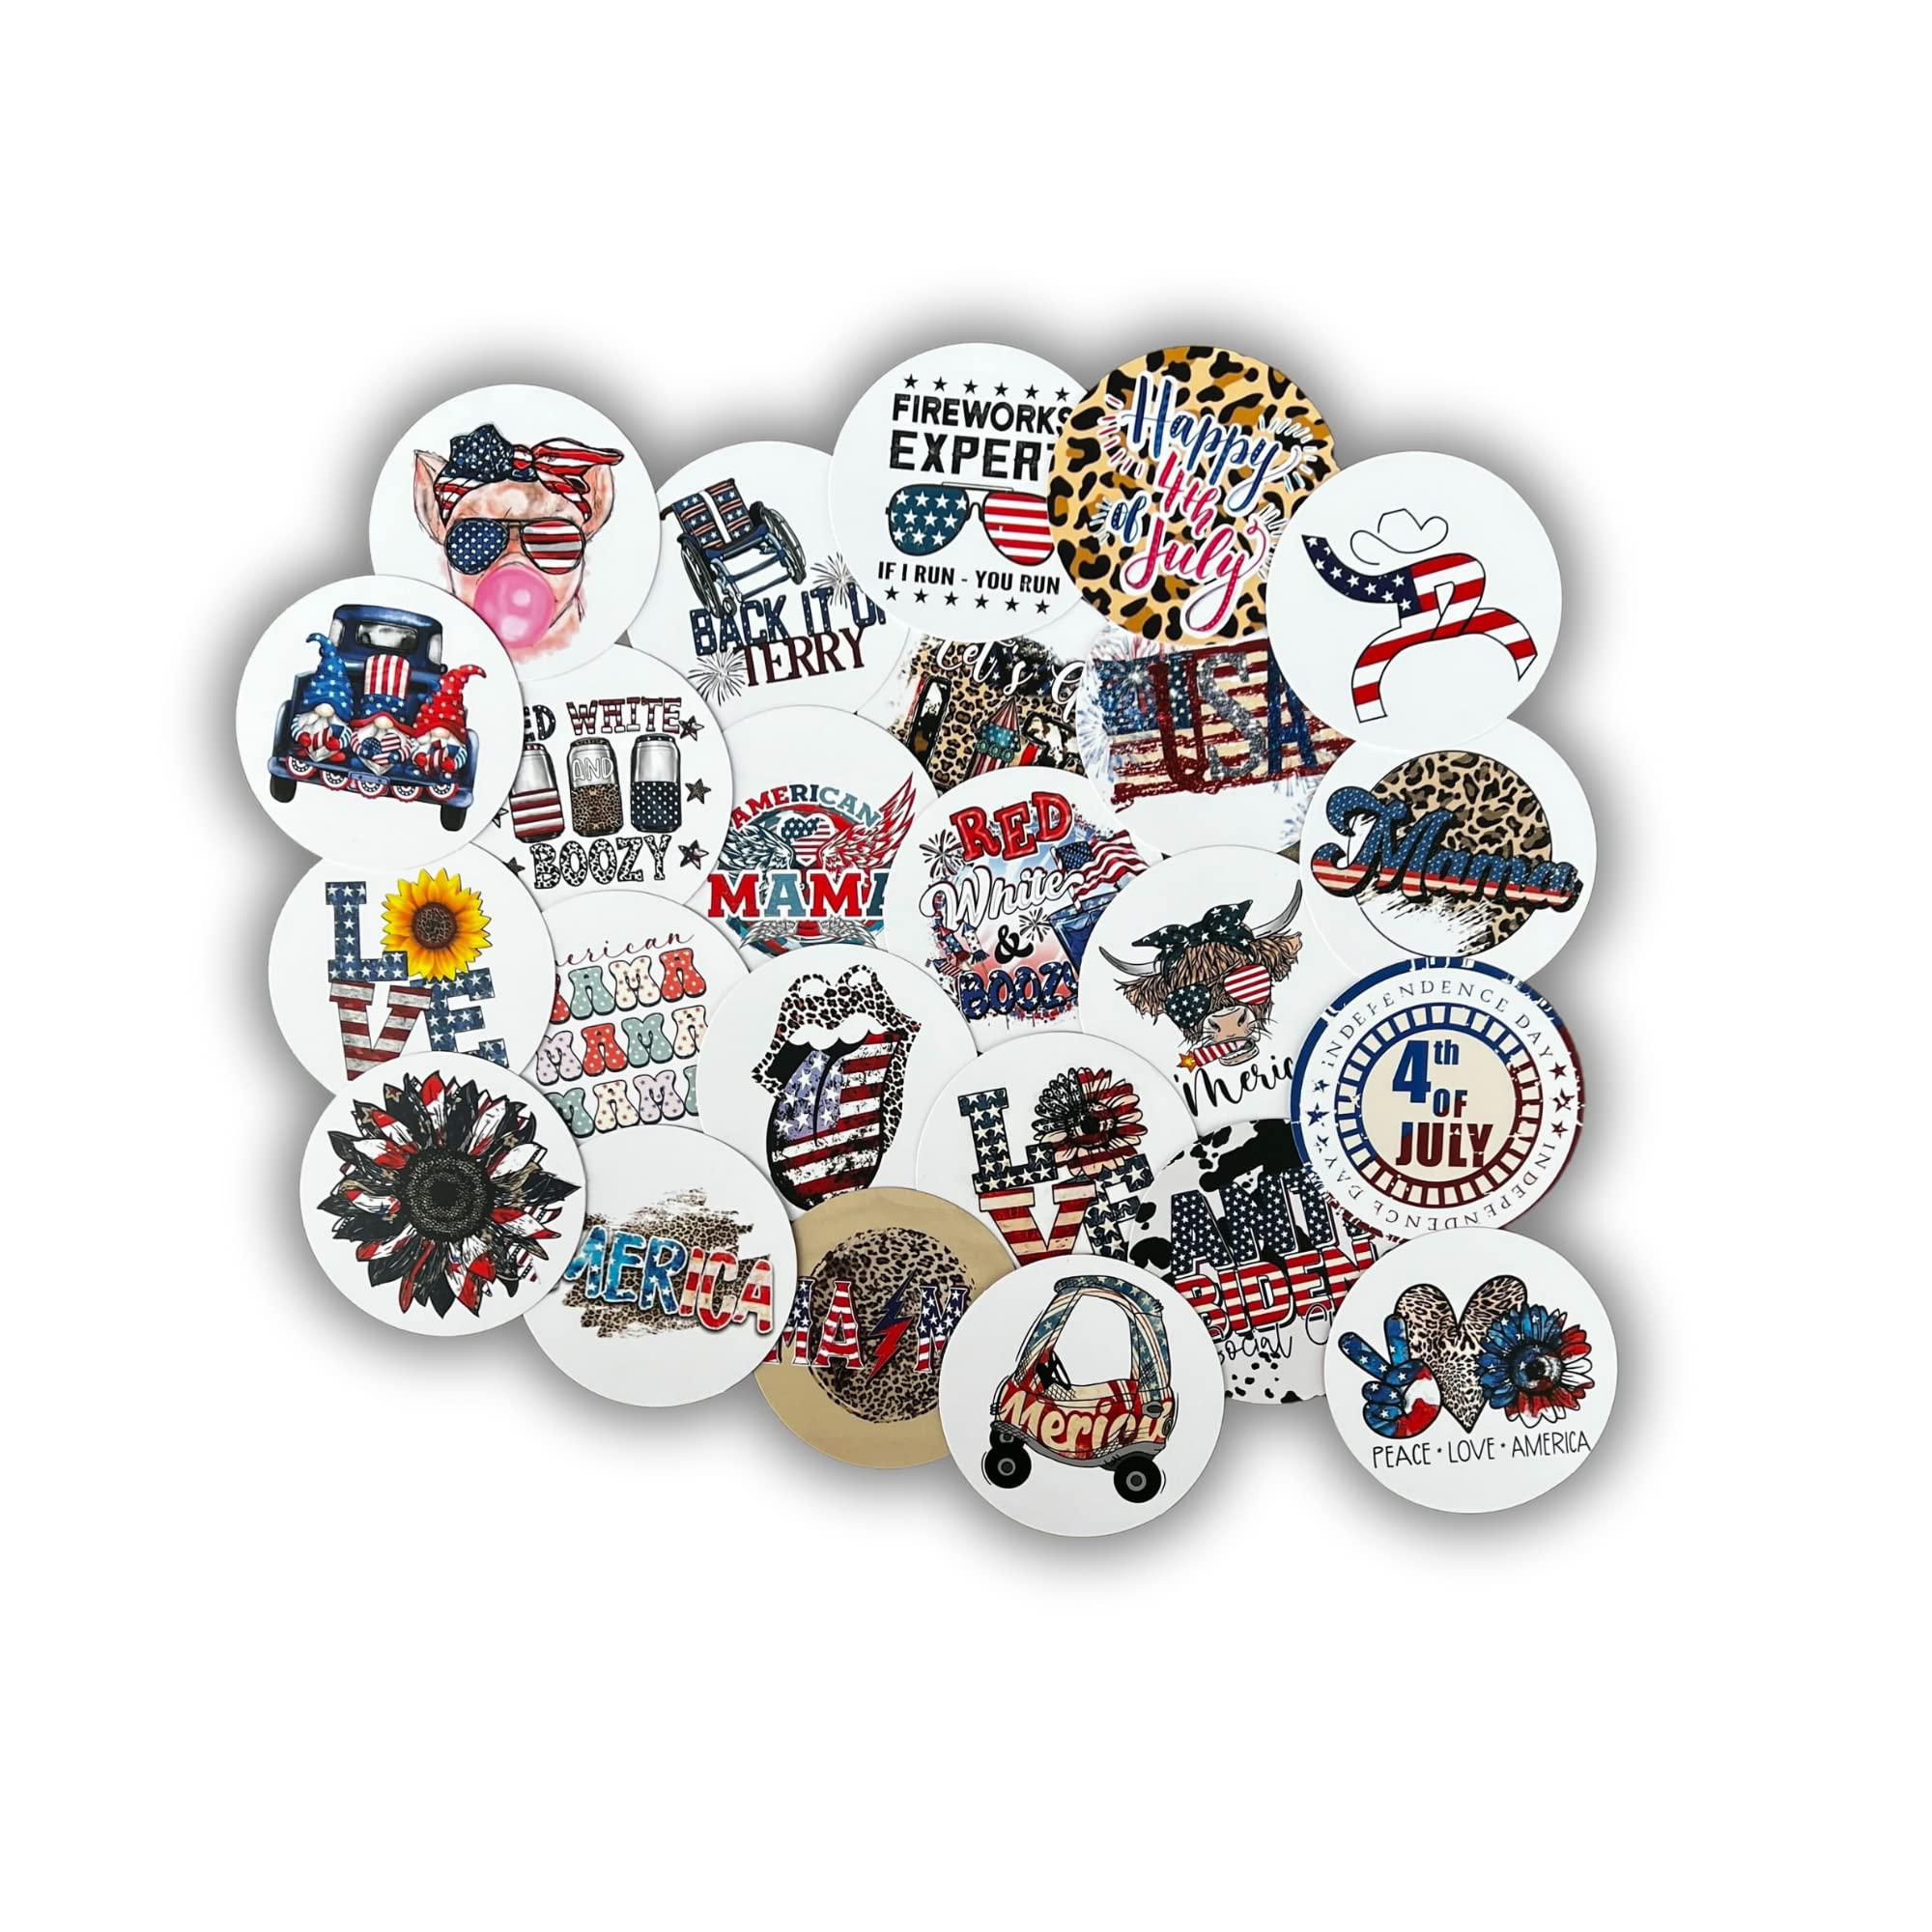 Lashicorn 4th of july freshie cardstock circles cutouts rounds 2.5 inches | 24 pk mixed | oven bake for aroma beads heavy weight paper 